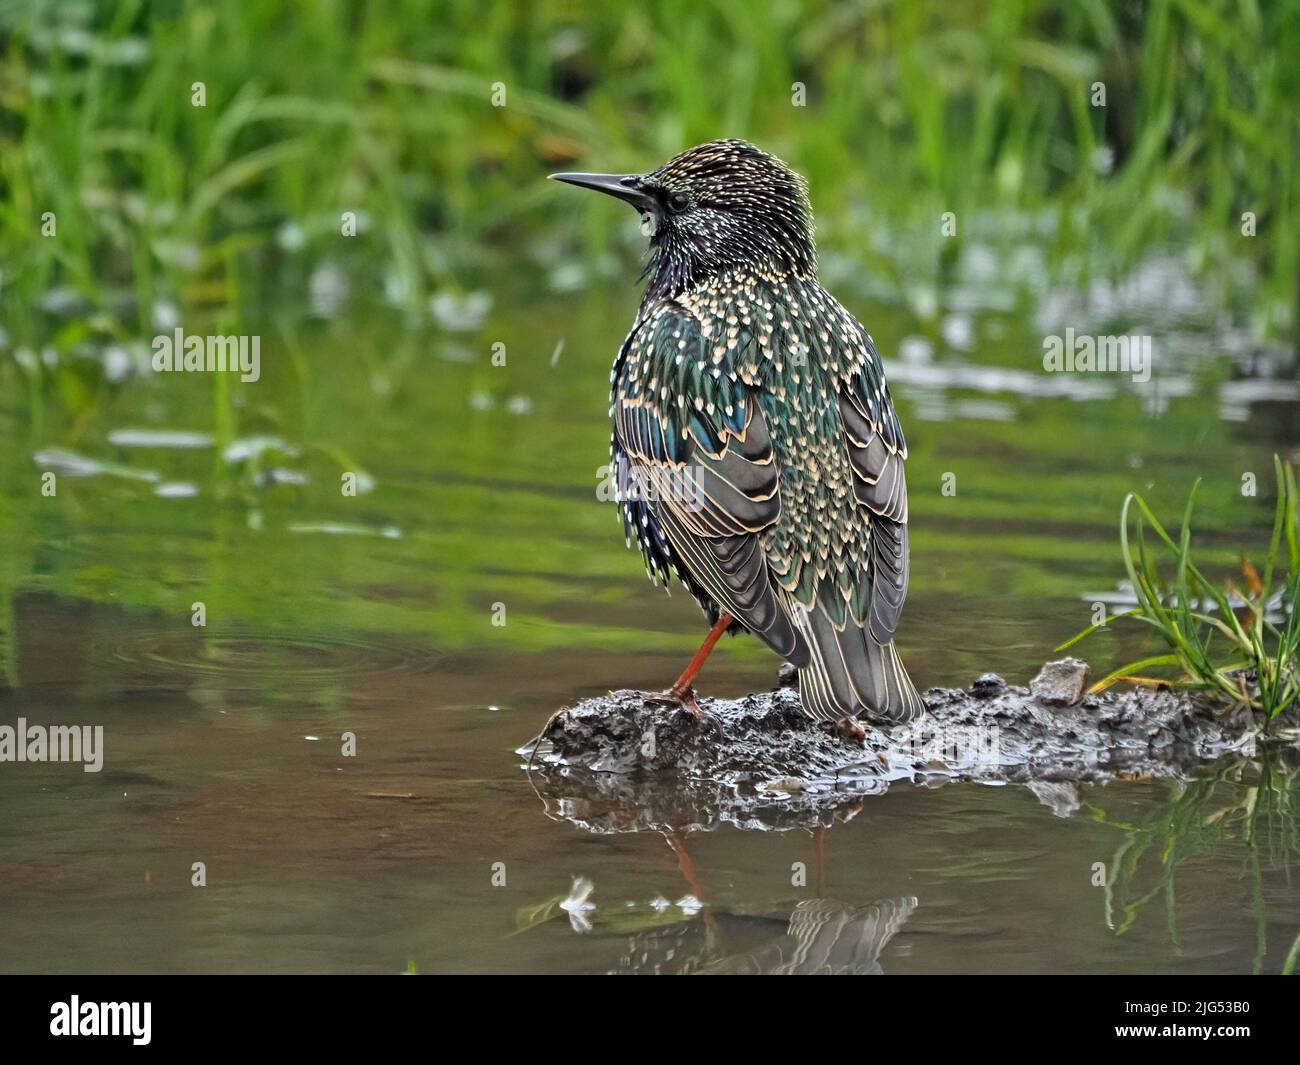 common starling or European starling (Sturnus vulgaris) bathing in a muddy puddle in Cumbria,England,UK Stock Photo